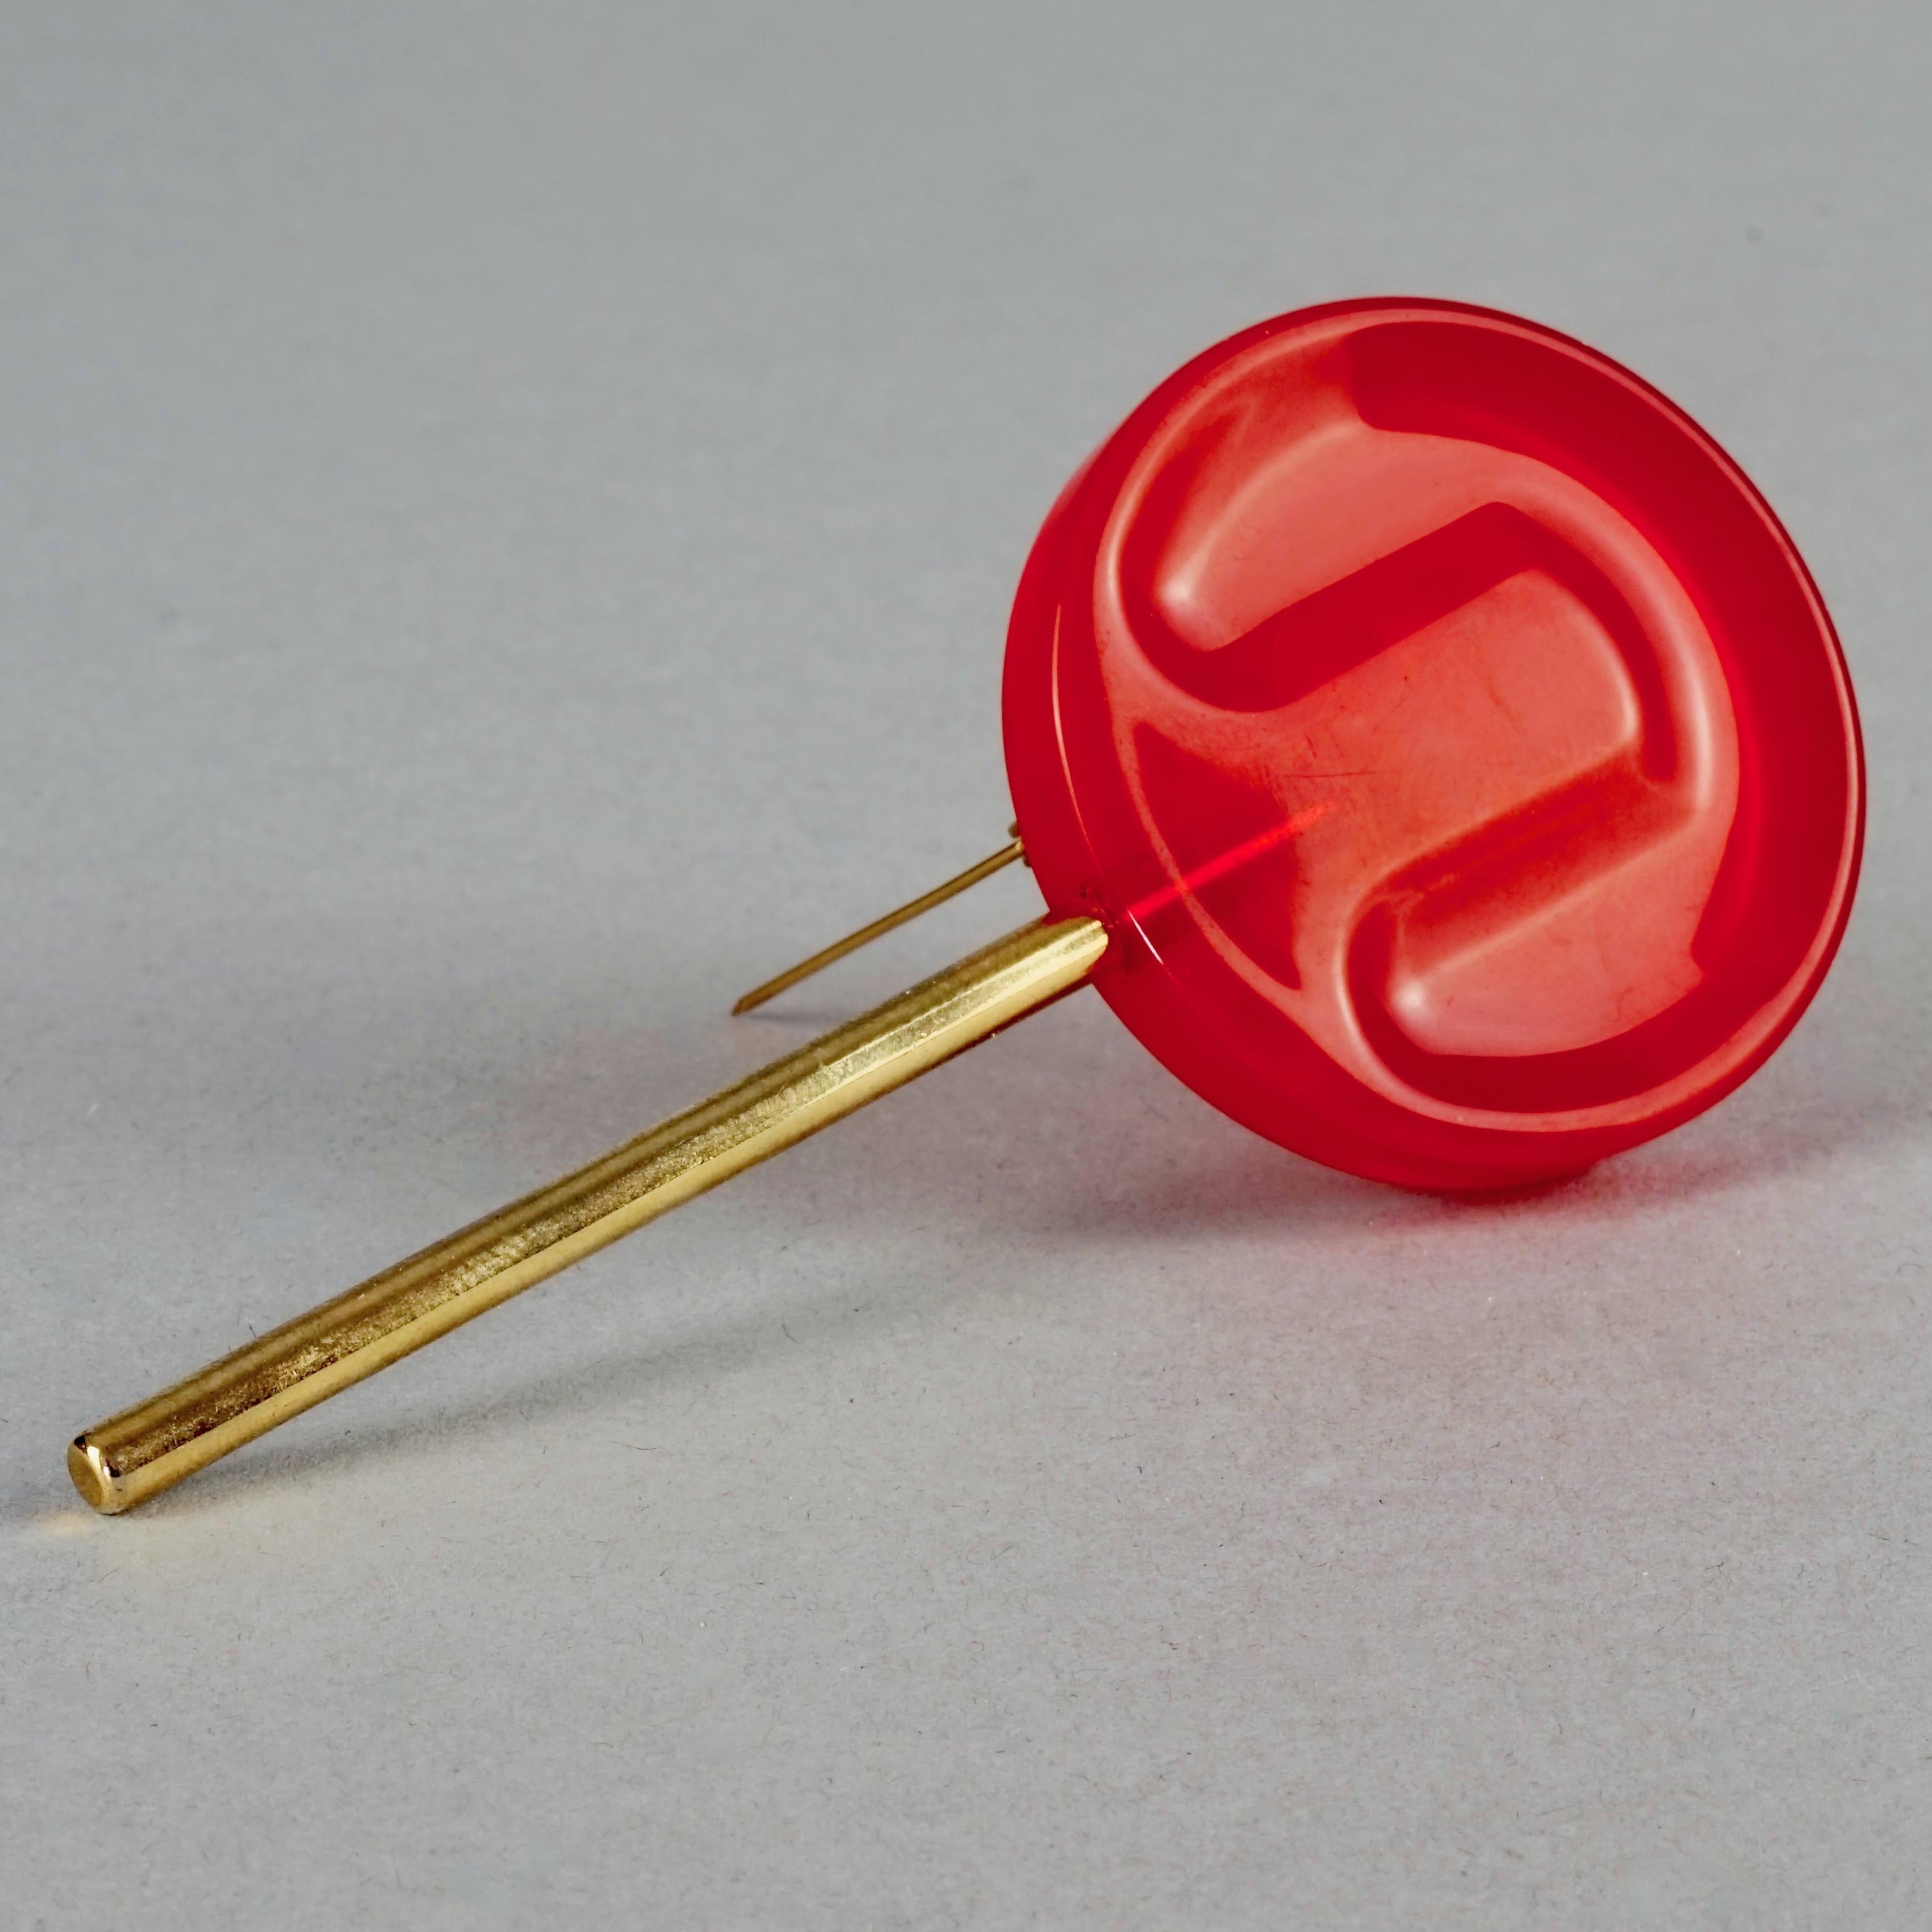 Vintage MOSCHINO Red Cherry Lollipop Candy Novelty Brooch In Excellent Condition For Sale In Kingersheim, Alsace